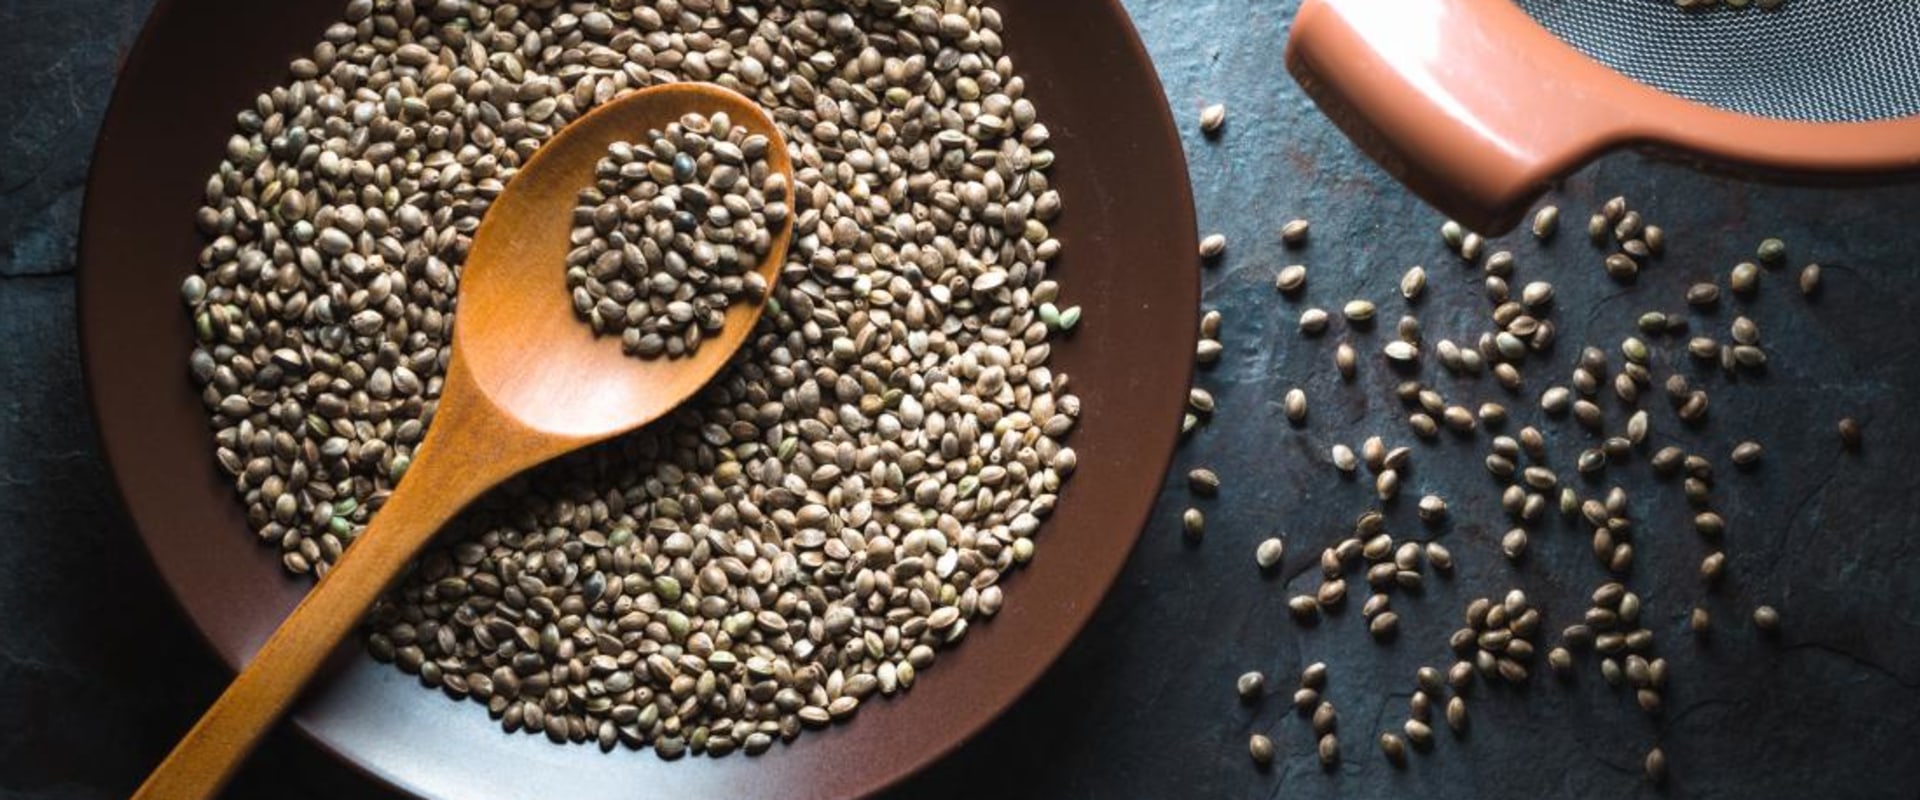 How Much Hemp Seeds Should You Eat in a Day?